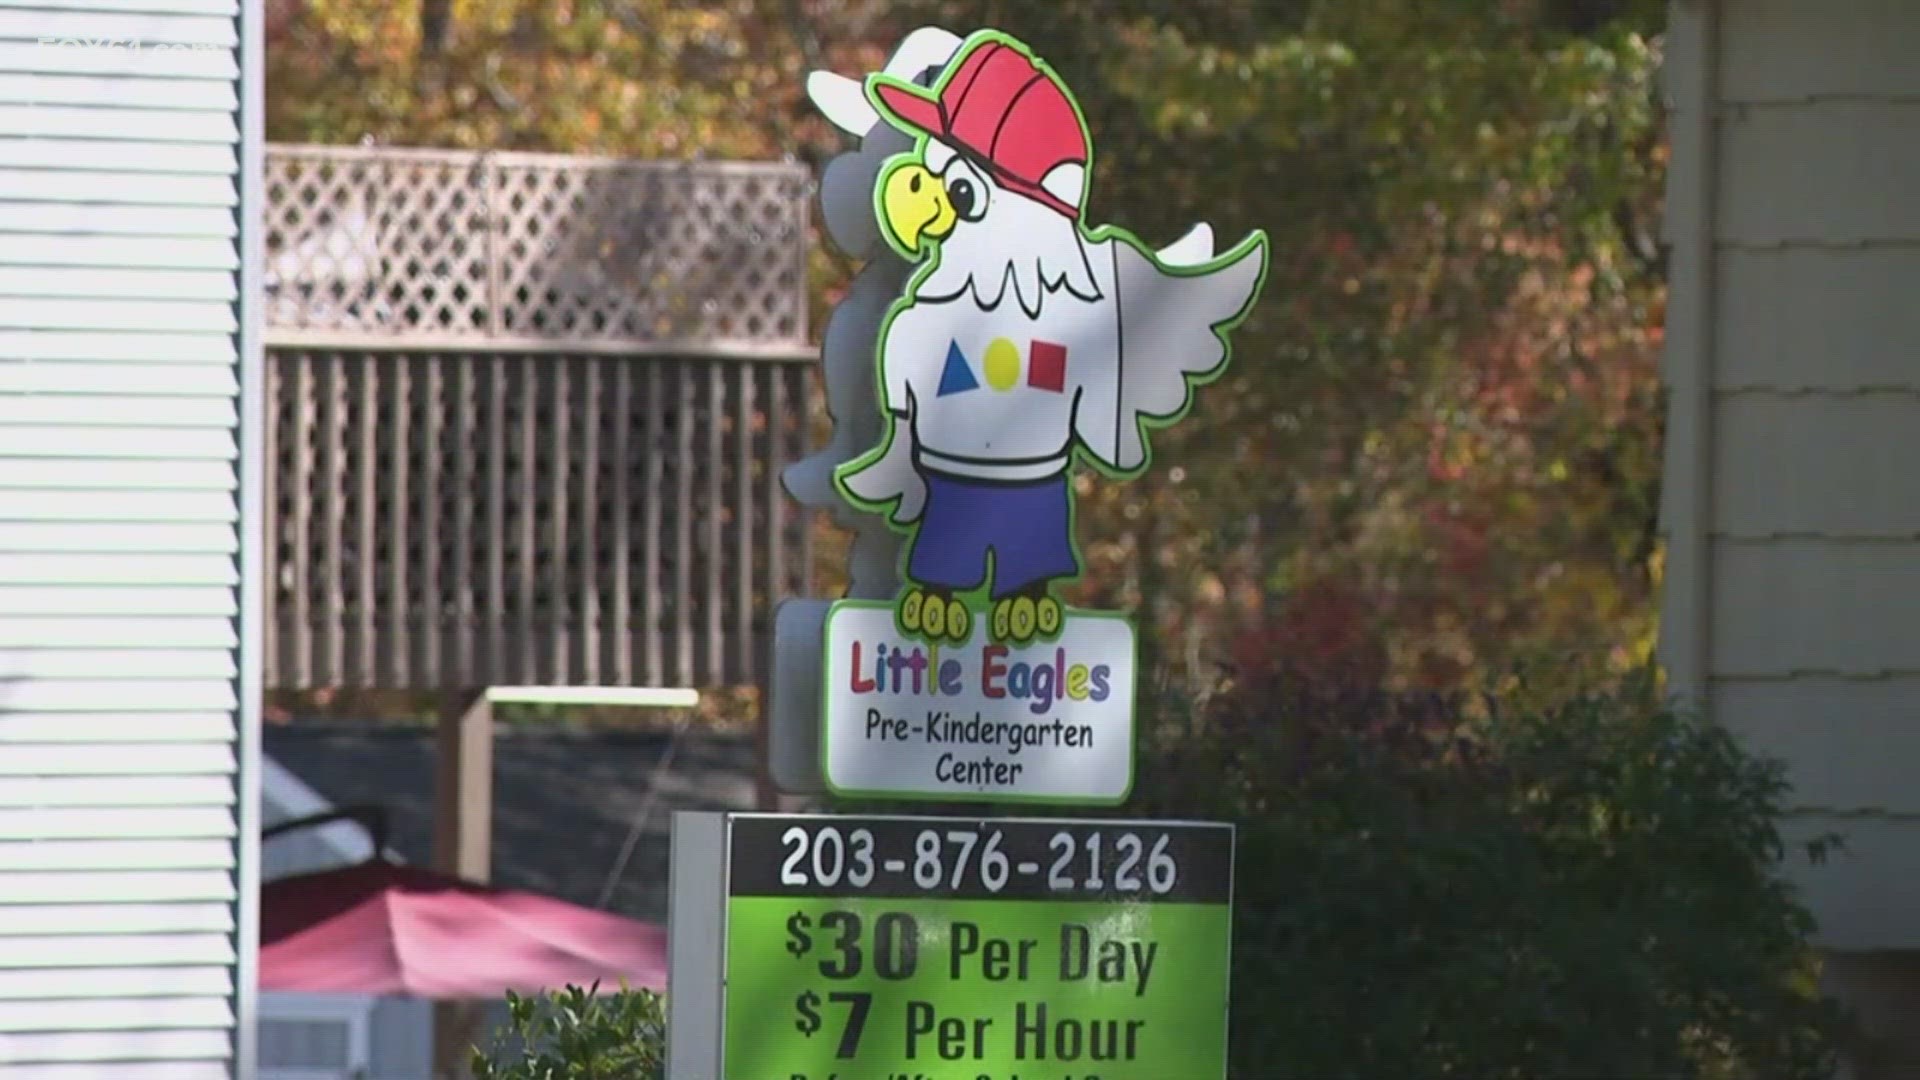 Church leaders are hoping the judge will rule in favor to keep the daycare open.